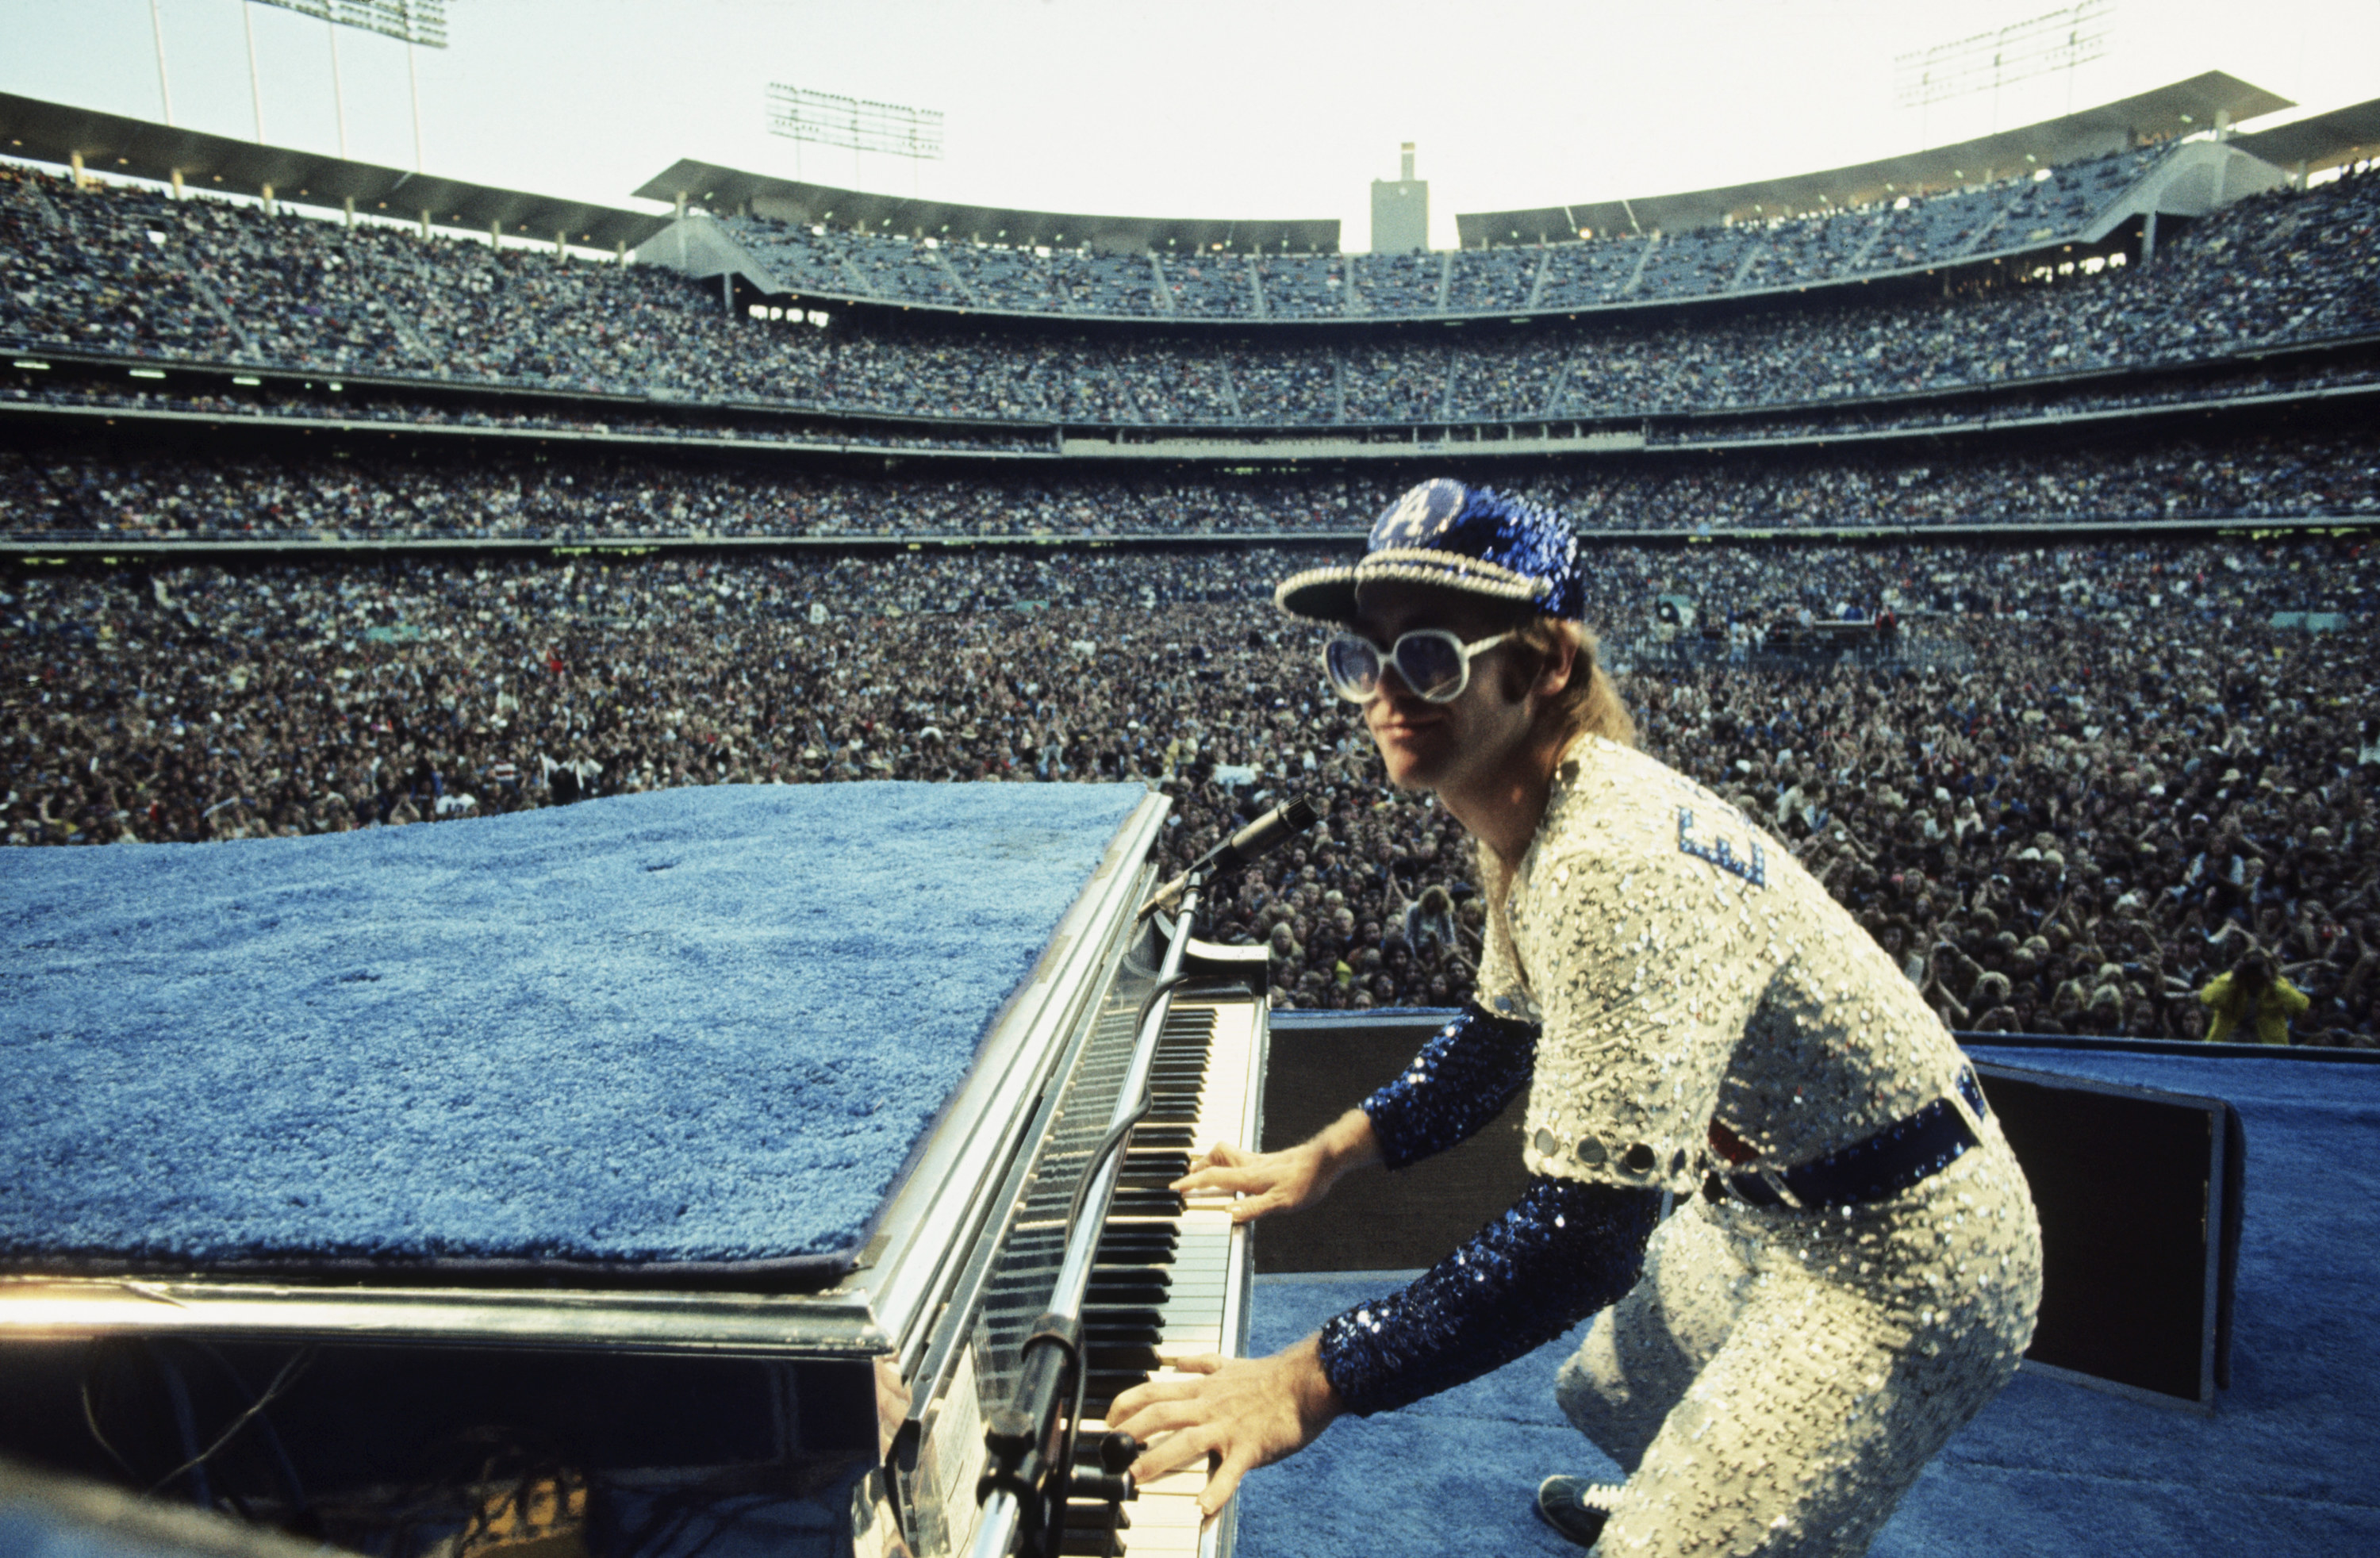 Elton John performing while wearing a jeweled baseball outfit